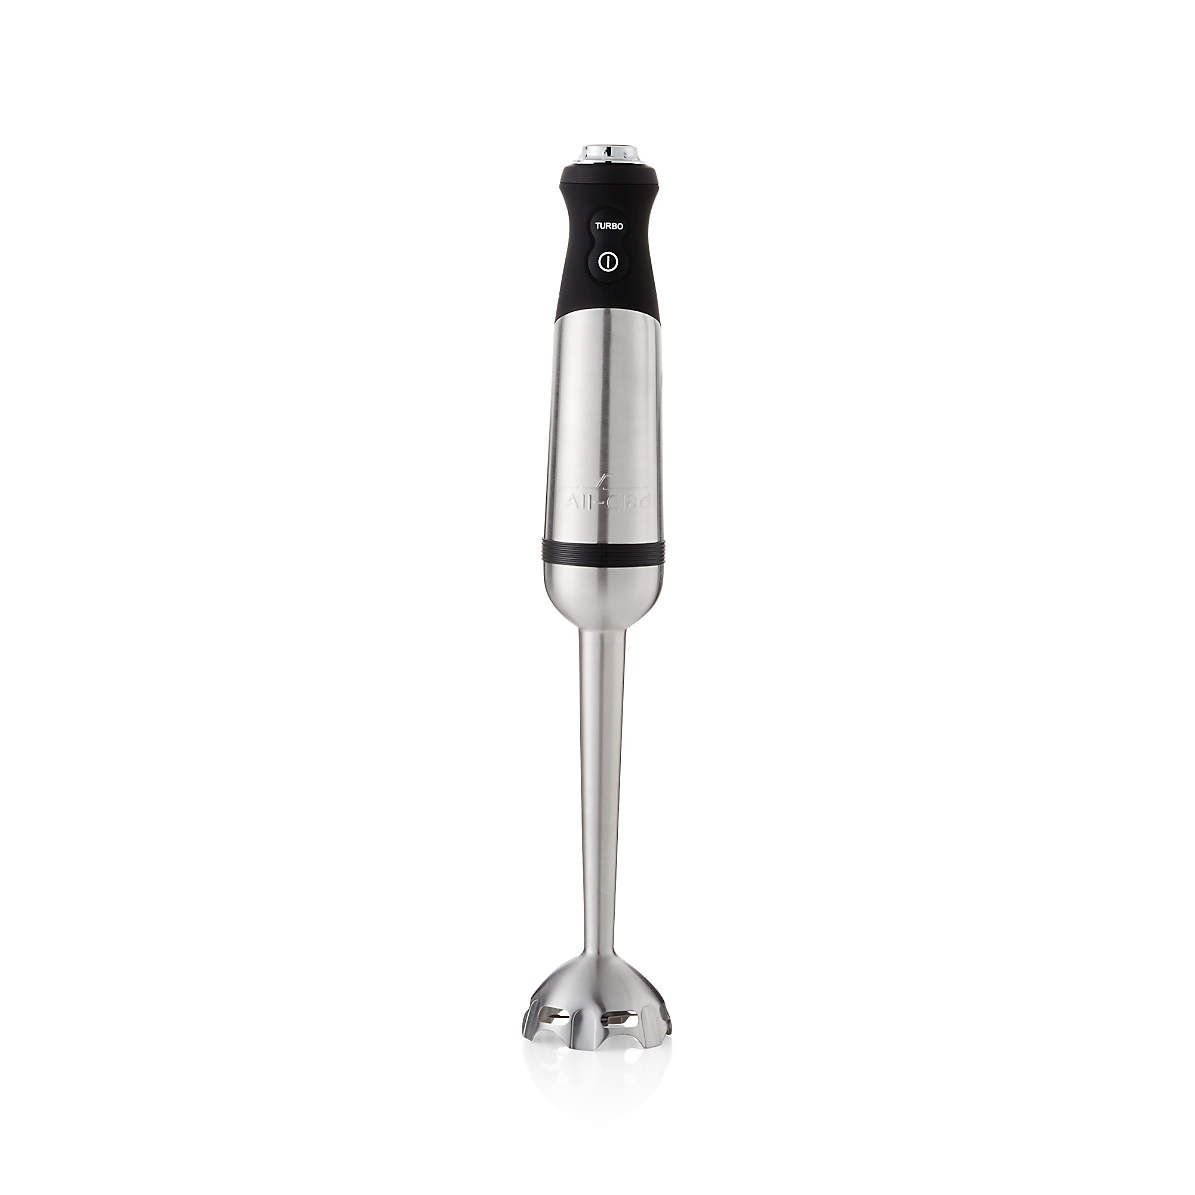 All-Clad Stainless Steel Multi-Functional Hand Immersion Blender